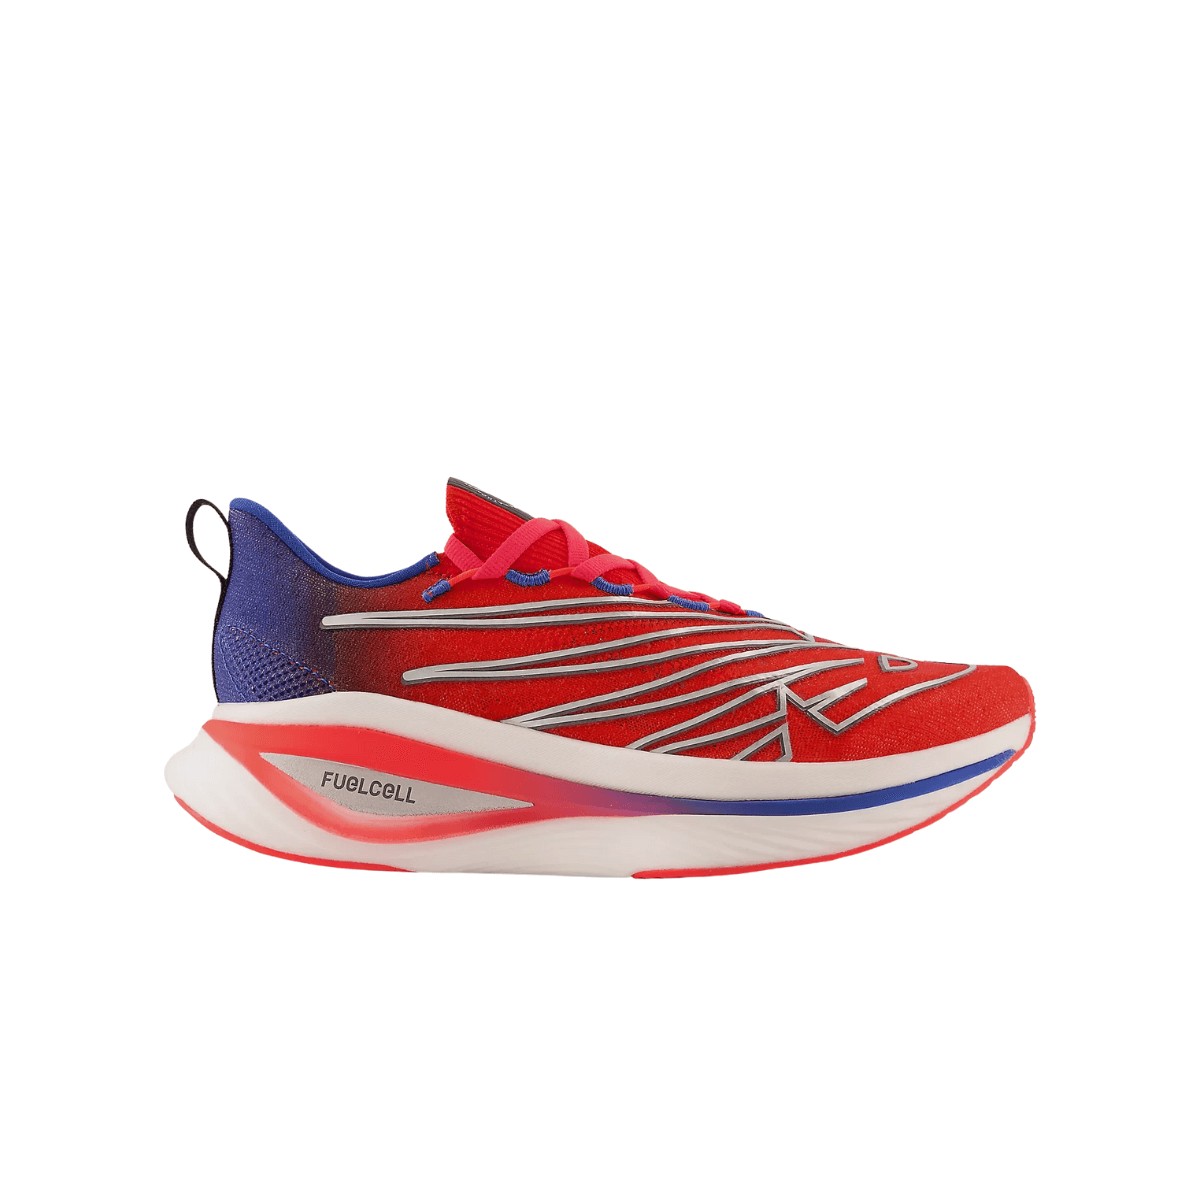 Chaussures New Balance FuelCell SC Elite V3 NYC Marathon Rouge Bleu AW22 Femme, Taille 37,5 - EUR